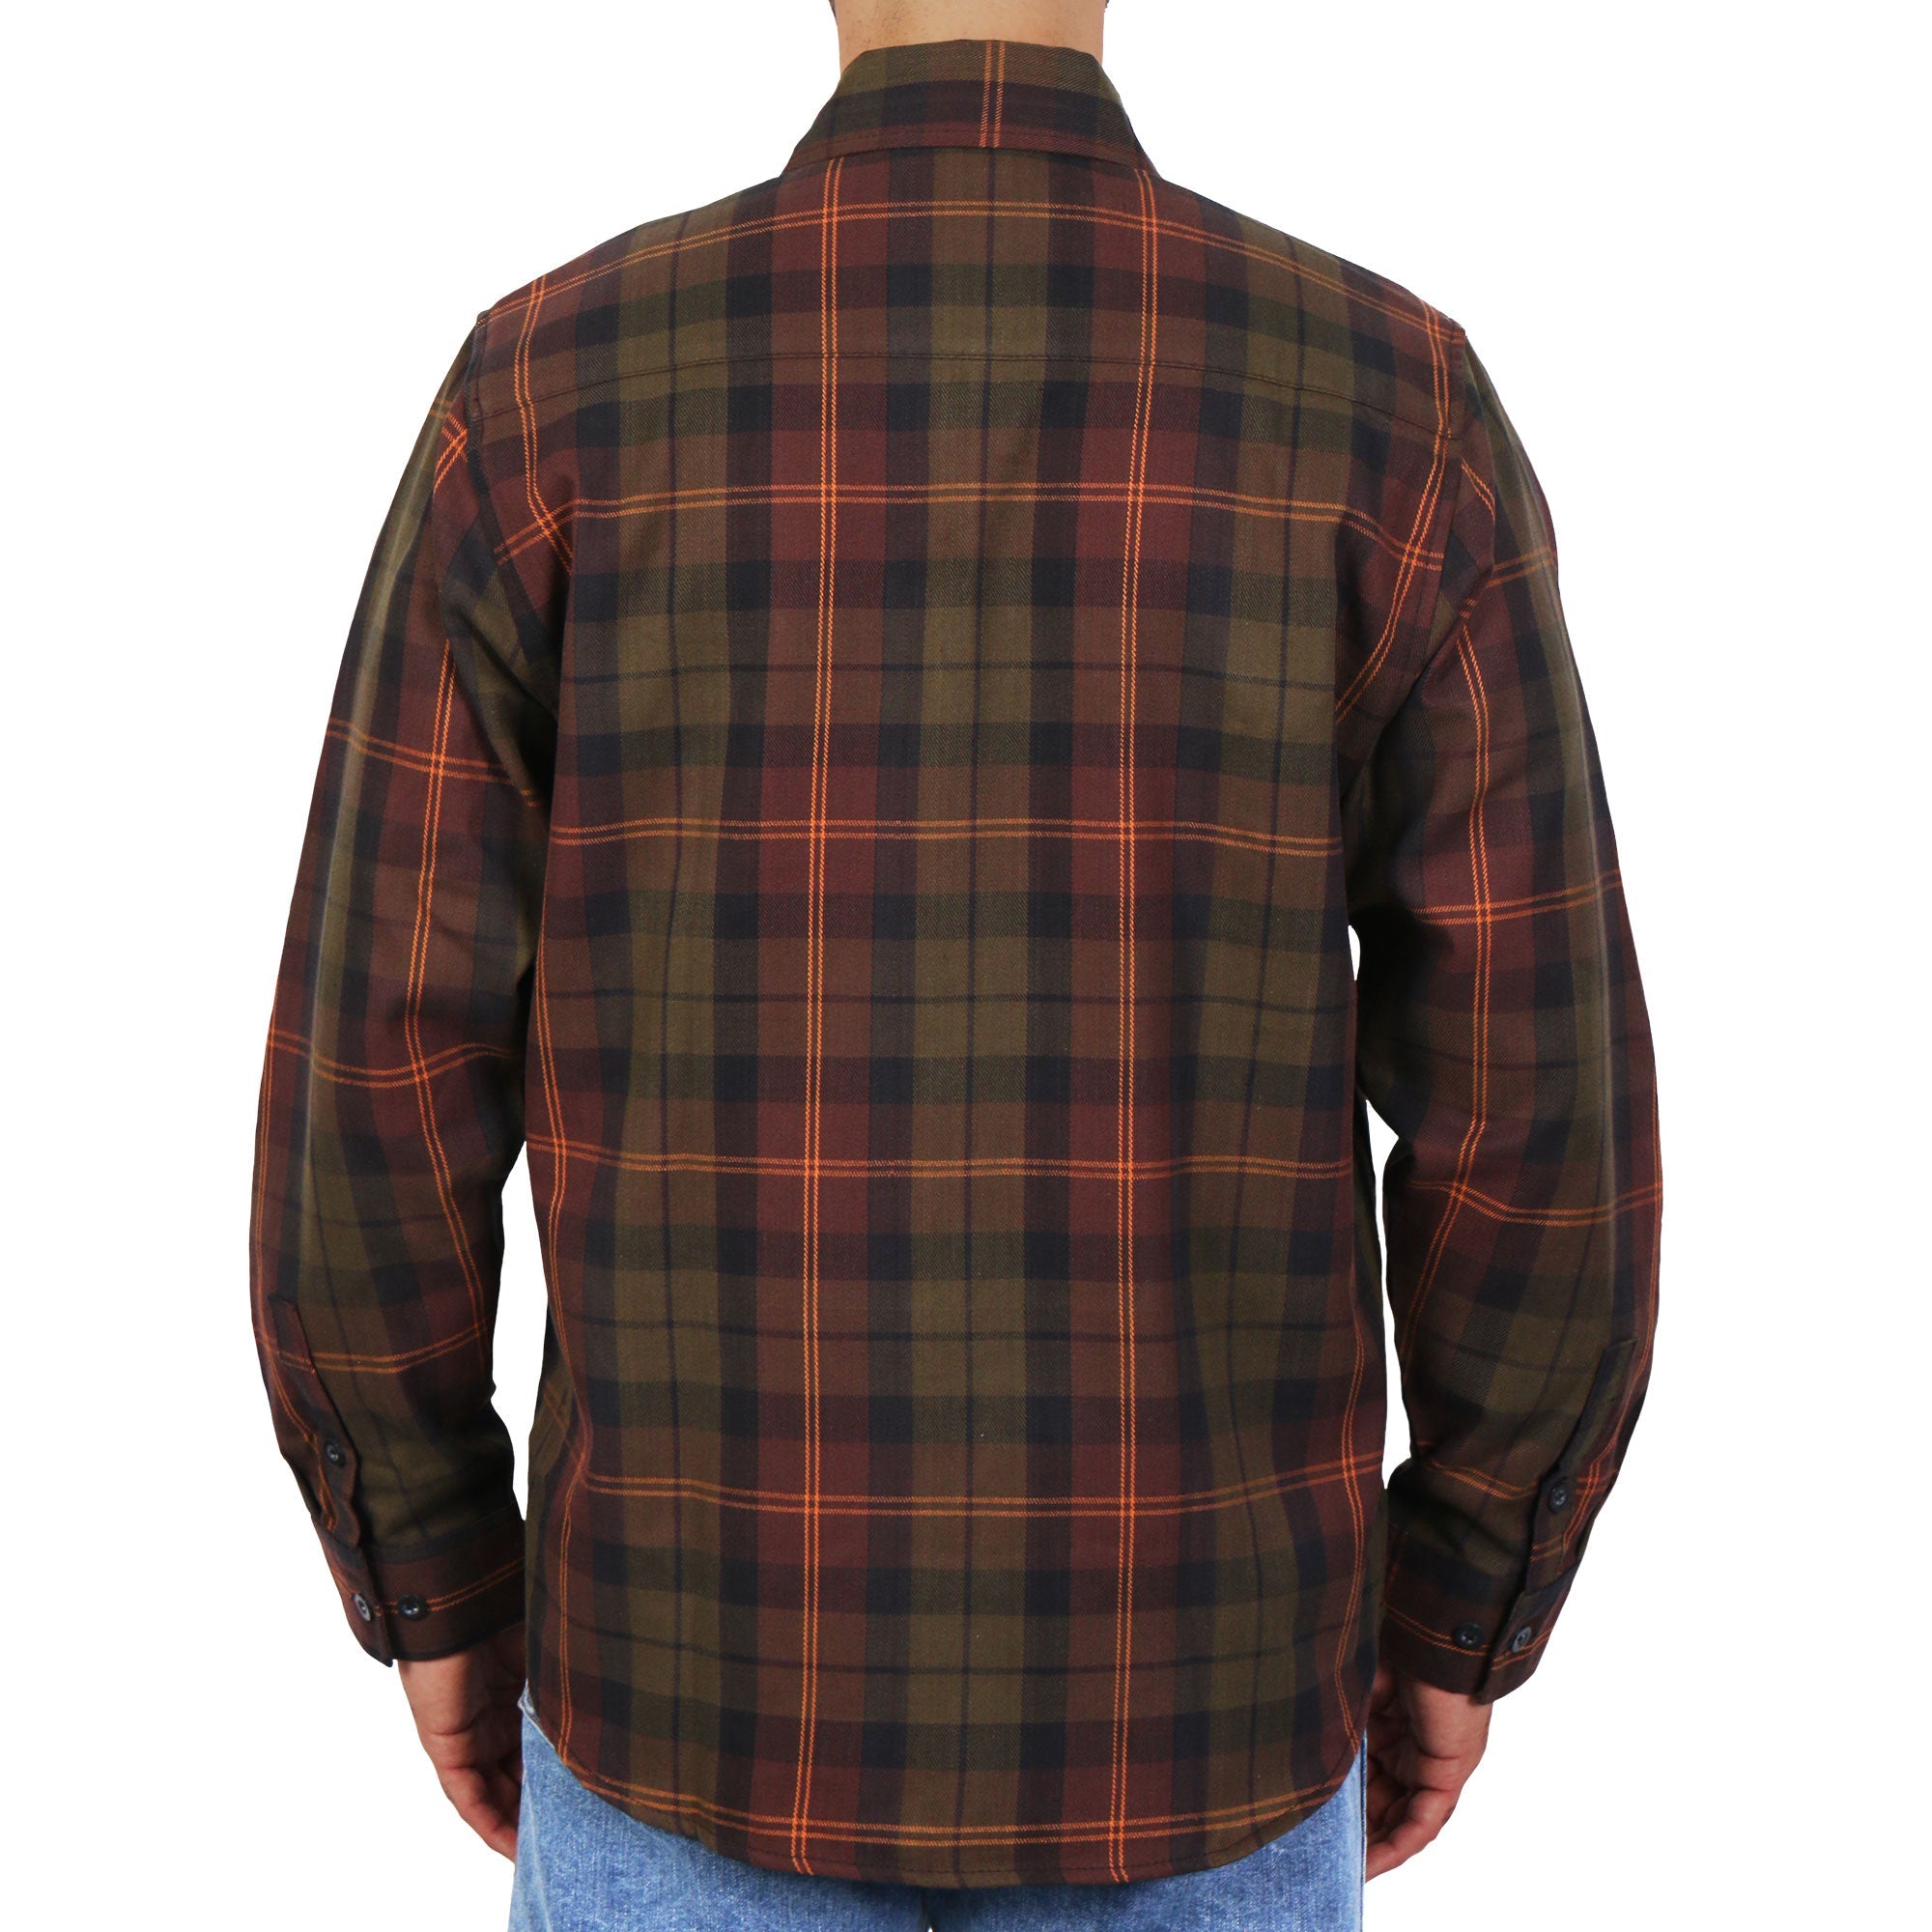 Hot Leathers Green Orange and Brown Flannel Shirt